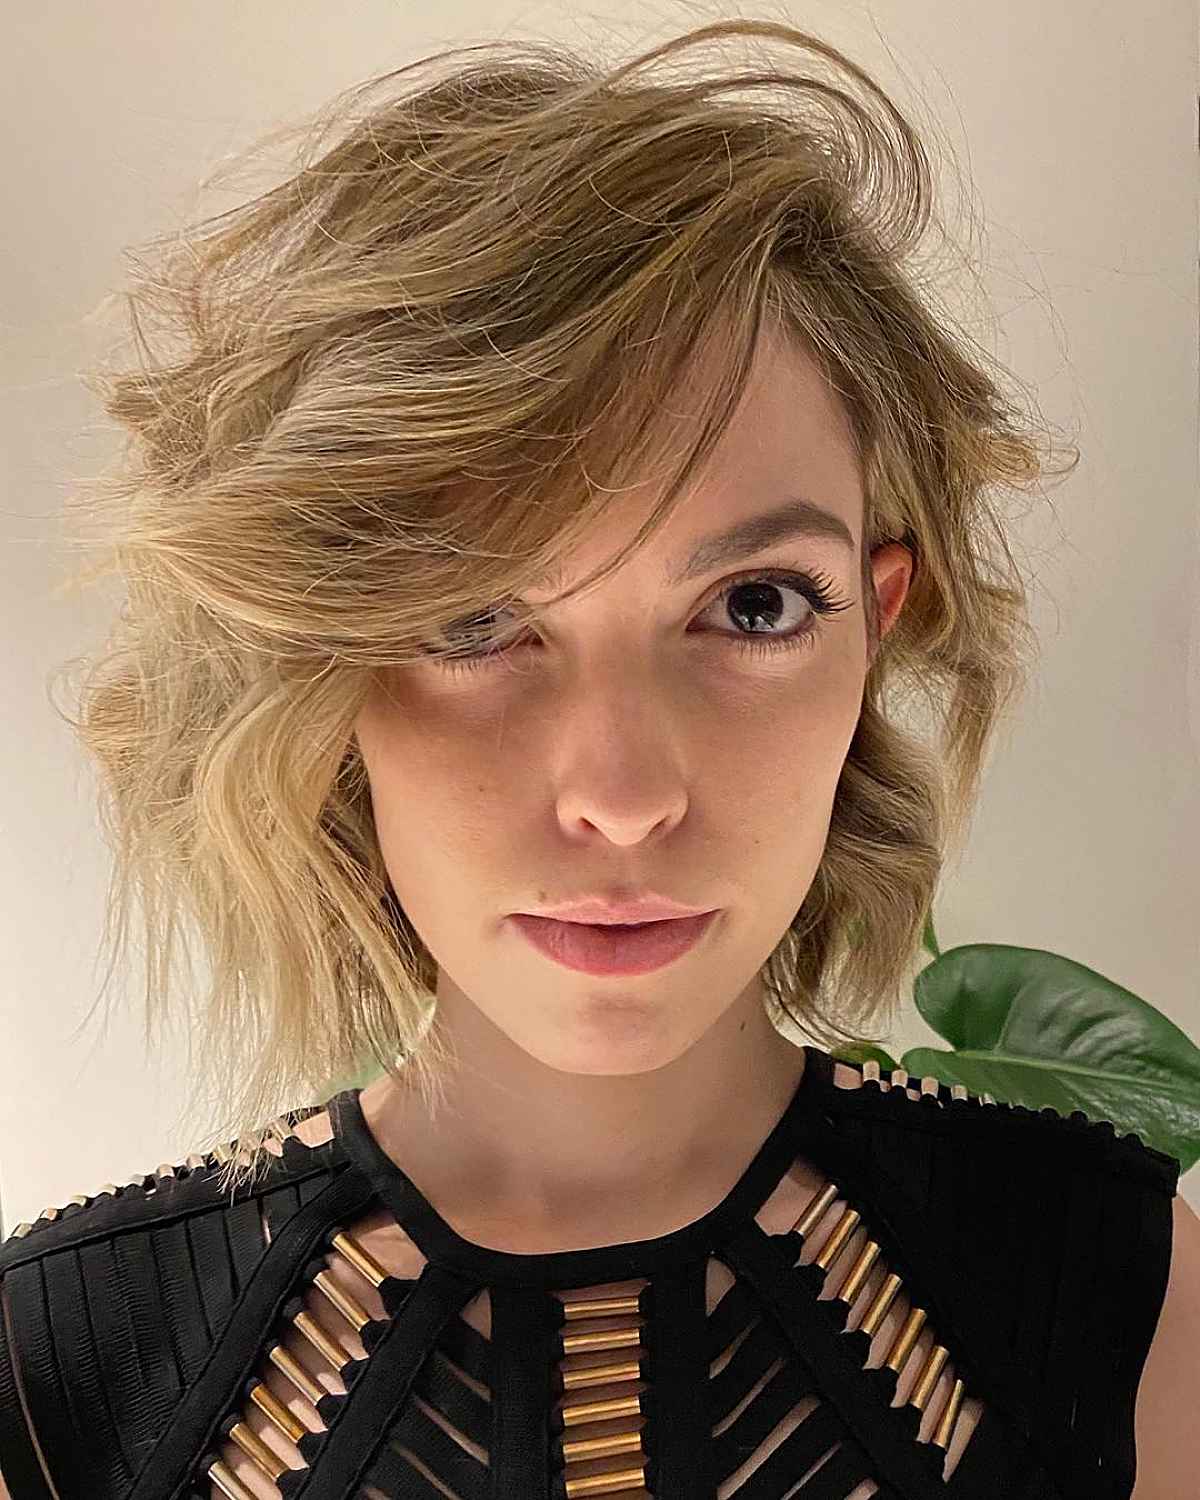 Textured Cut with Bangs to One Side